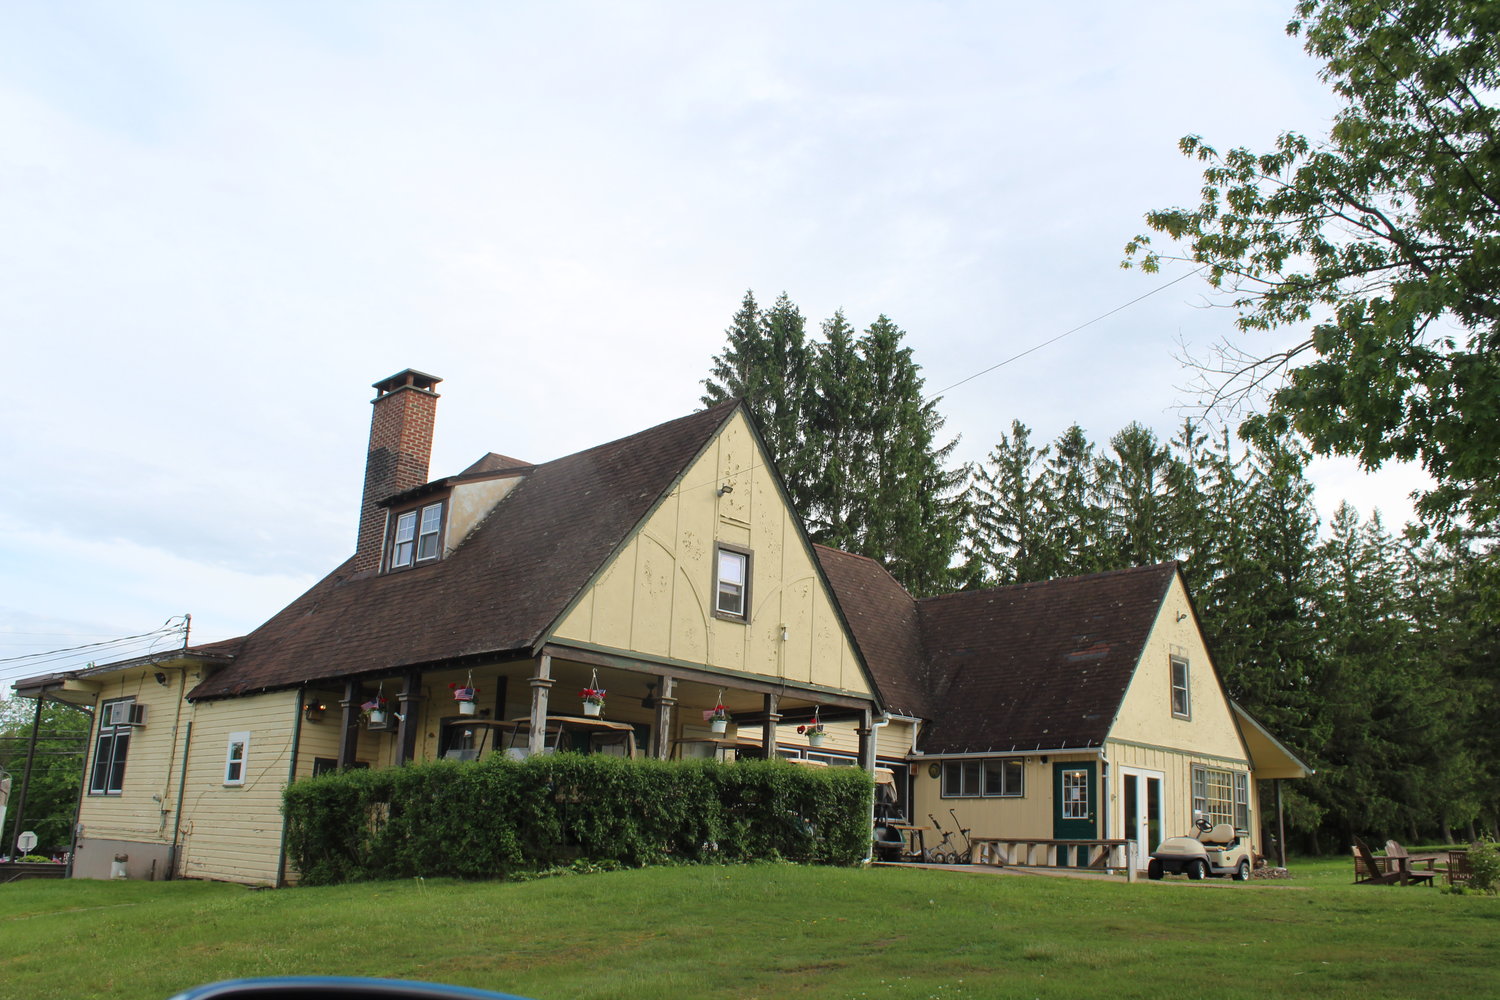 The historic Sullivan County Golf & Country Club clubhouse which also housed the former Oscar Brown's Restaurant, the Clubhouse bar and lounge and a small pro shop where golfers signed in, now is only used to sign golfers in.